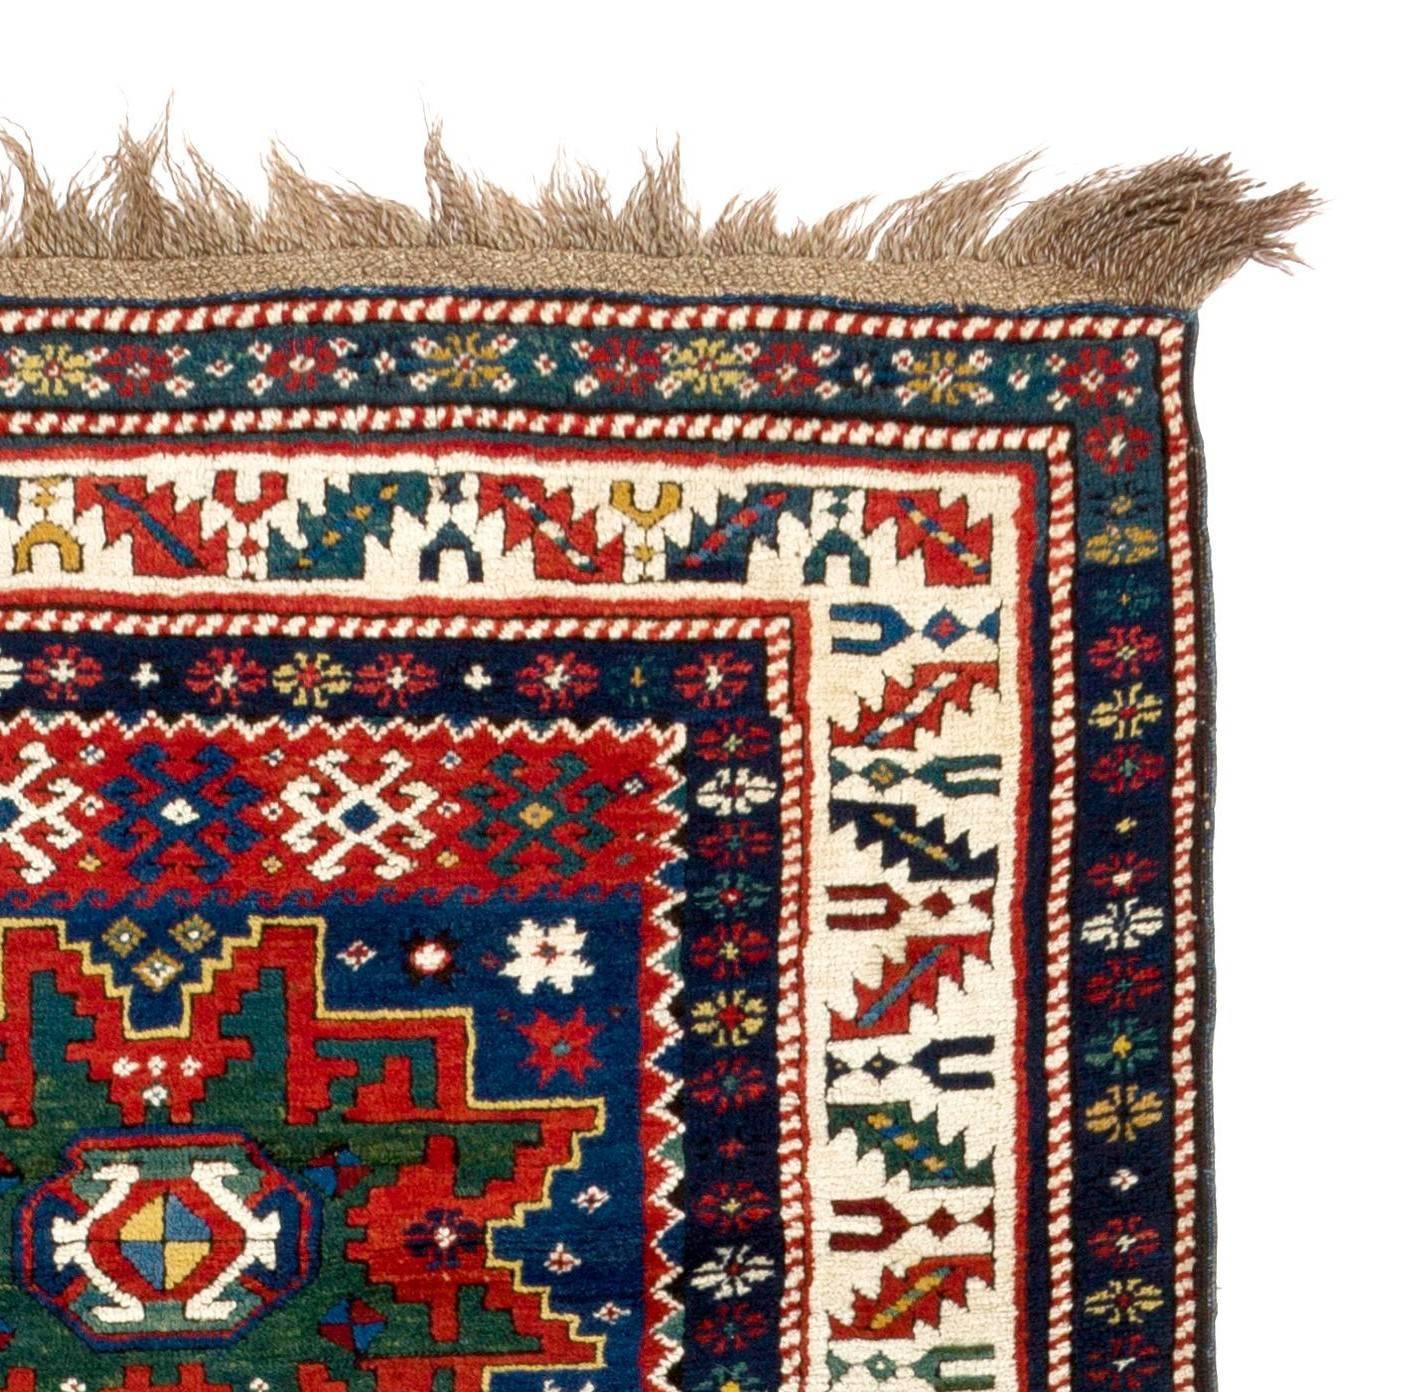 Hand-Knotted 3.7x8.3 Ft Antique Caucasian Karabagh Kazak Rug with Lesghi Stars, Ca 1890 For Sale